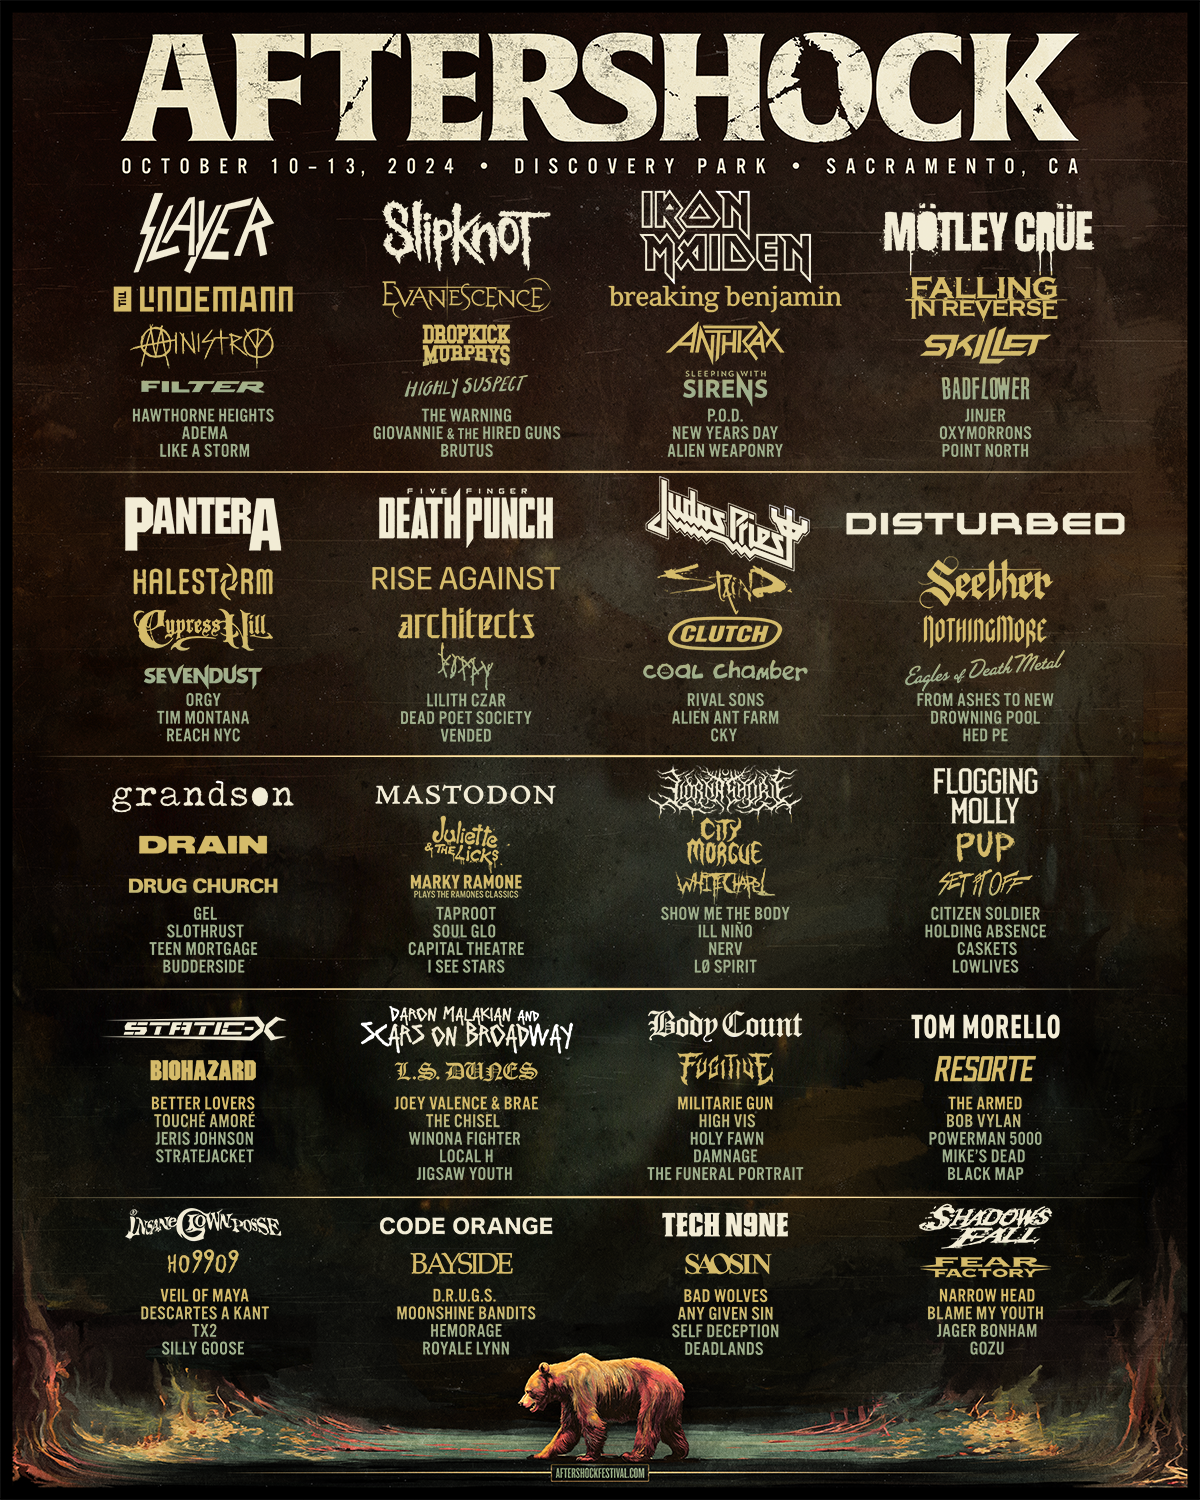 Disturbed at Aftershock Fest in Sacramento on Oct 13